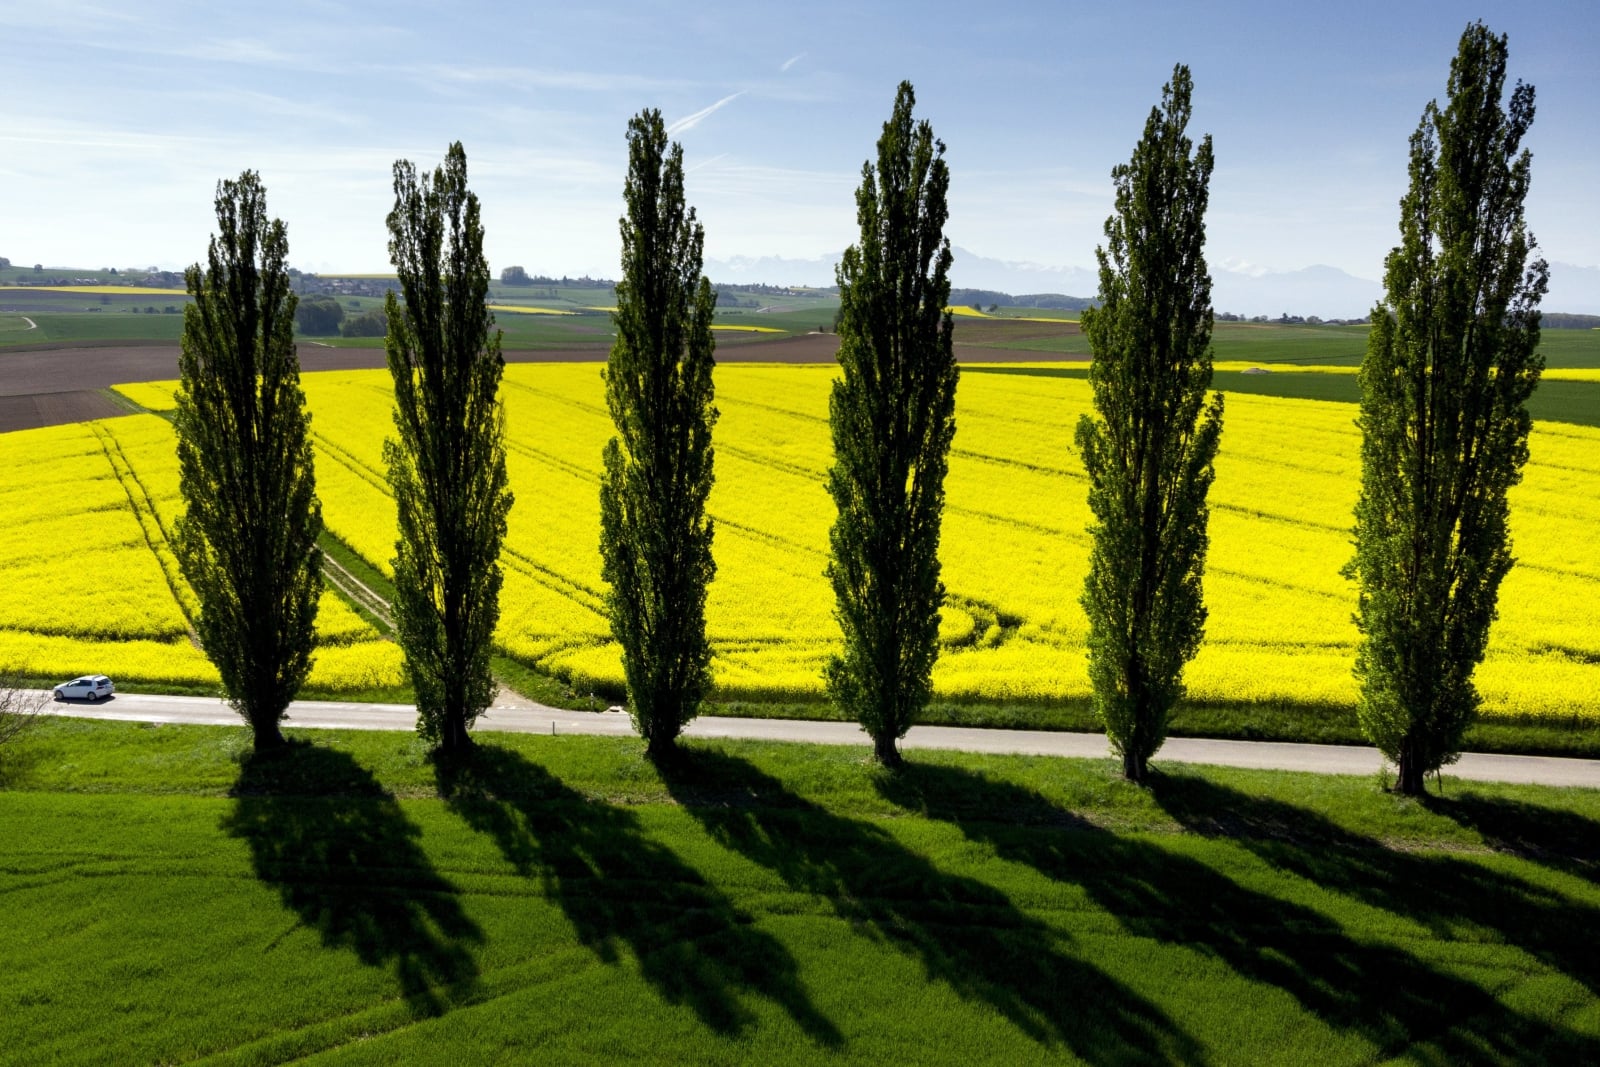 epa06696511 An aerial view taken with a drone shows a car drives on the road next to poplars and rapeseed field with bright-yellow flowers during a sunny and warm weather spring day, in Daillens, Switzerland, 27 April 2018.  EPA/LAURENT GILLIERON 
Dostawca: PAP/EPA.